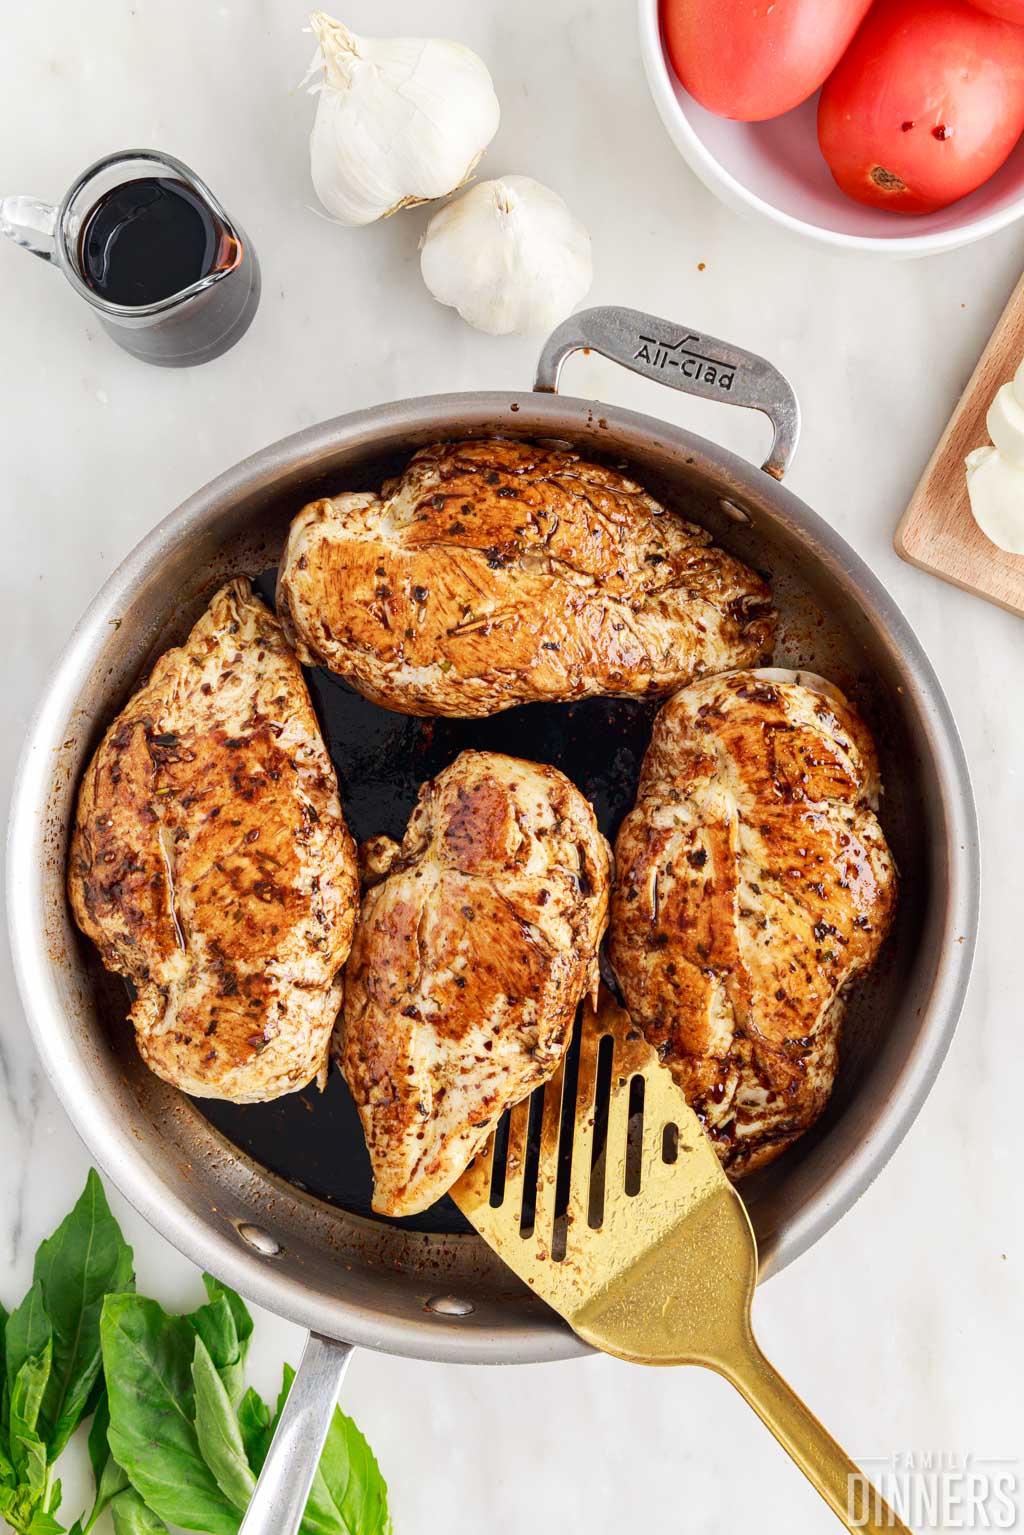 Chicken with balsamic glaze over top in skillet.